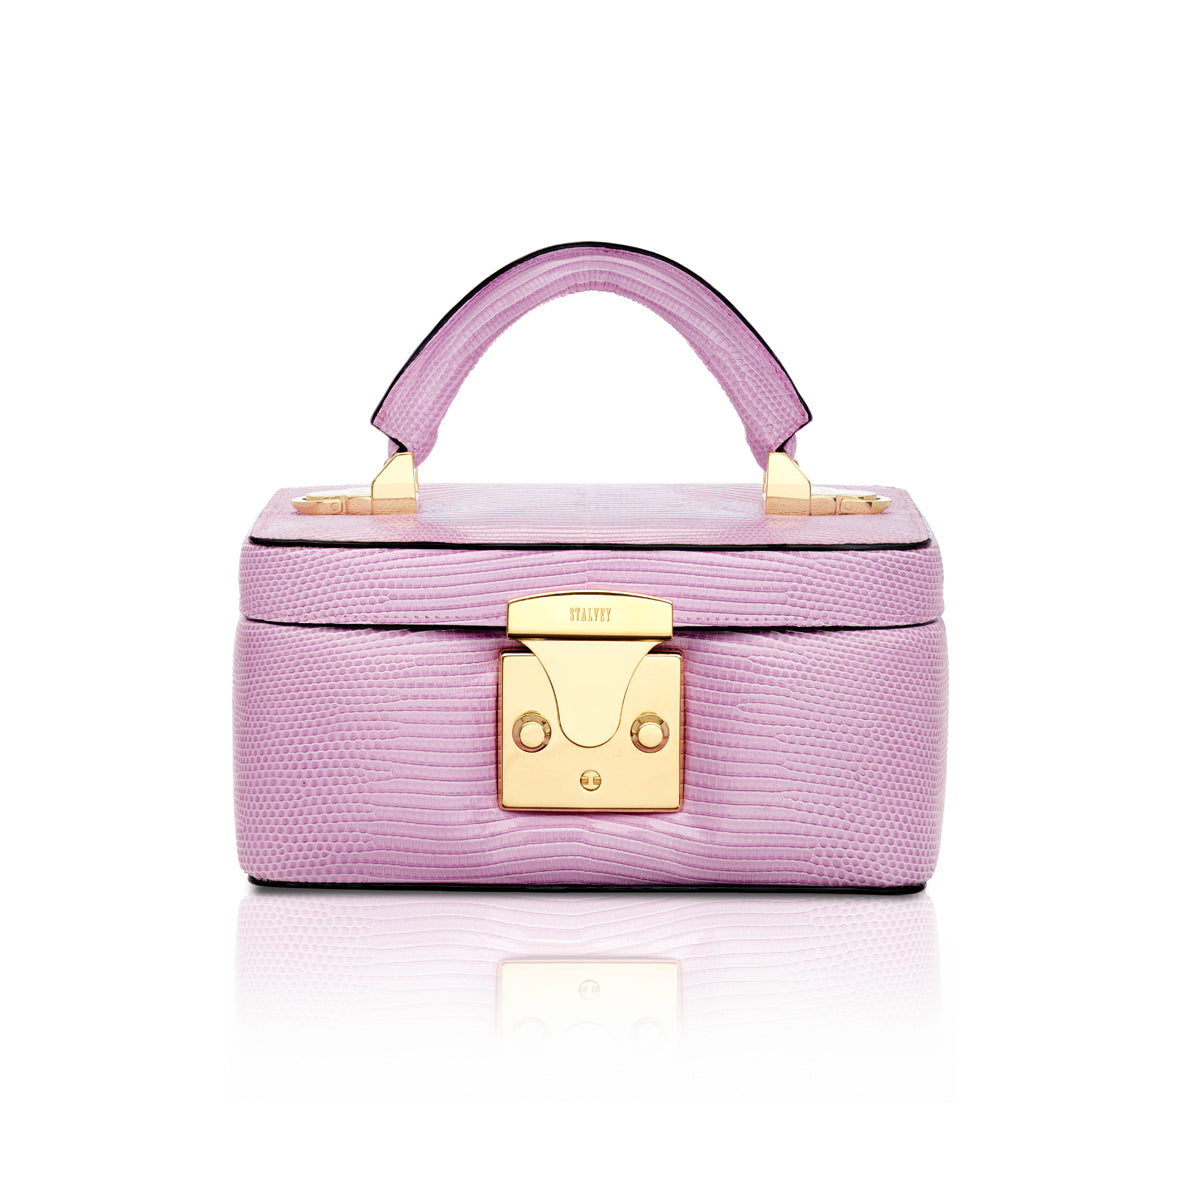 STALVEY Beauty Case in Lilac Lizard Front View